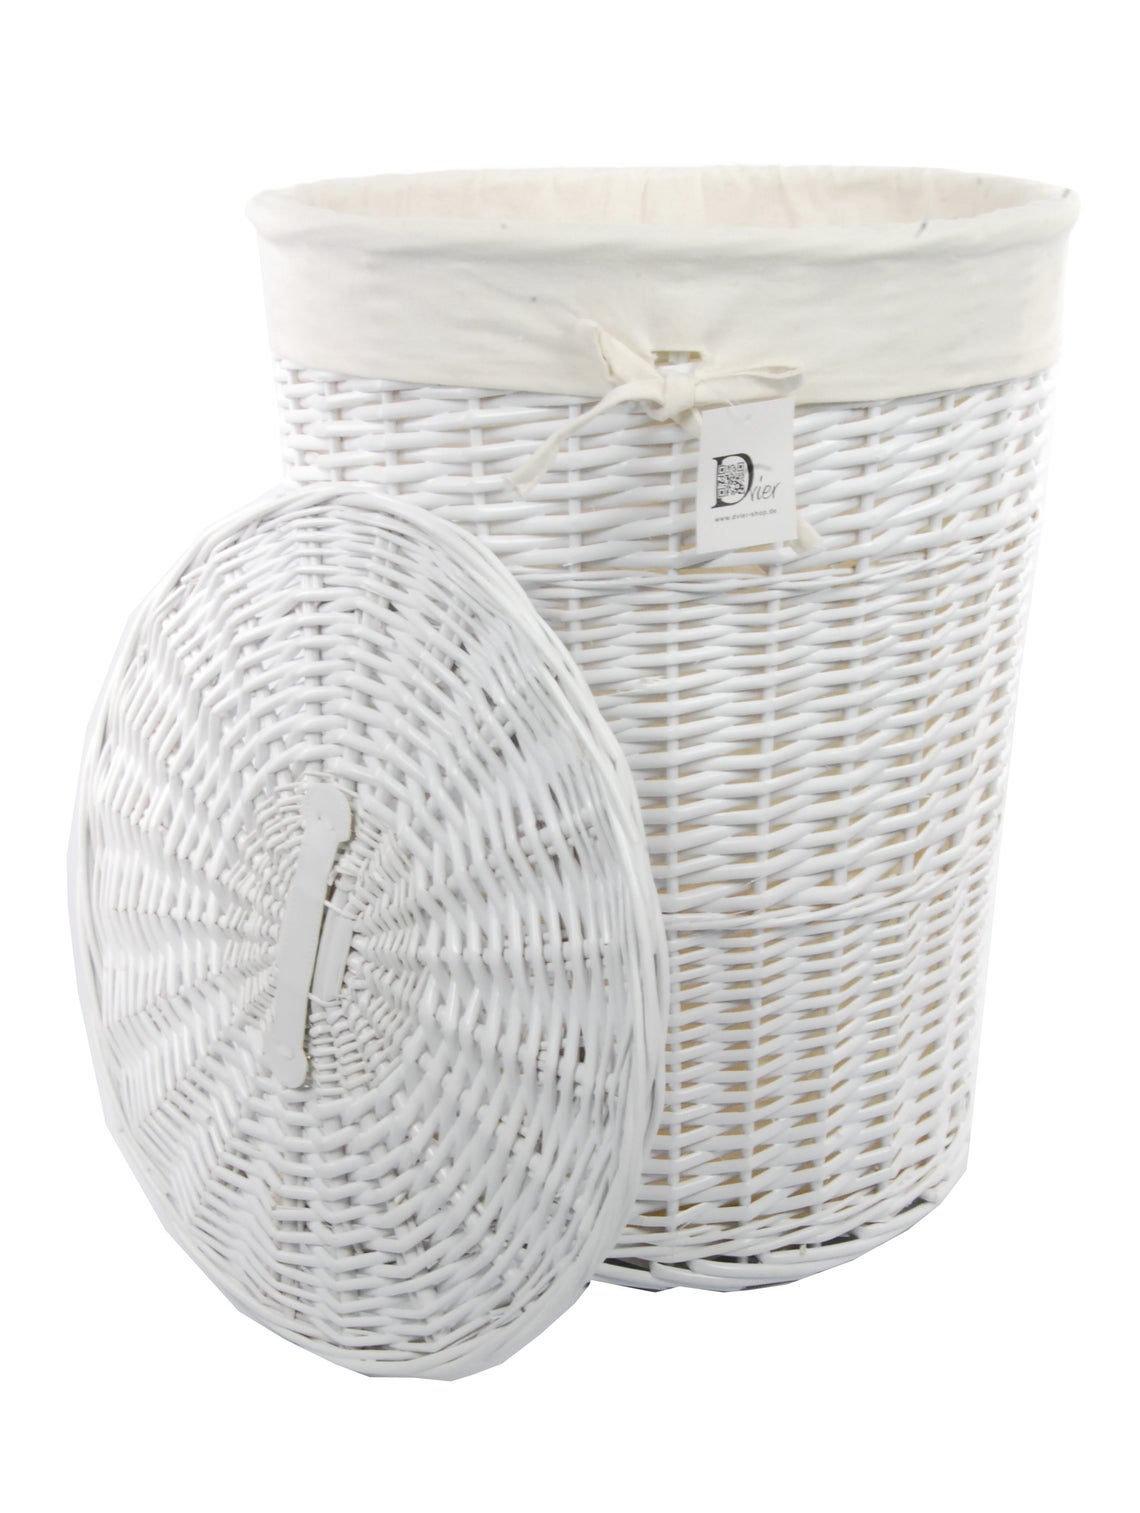 LAUNDRY BASKET 759170-L ROUND WHITE WITH LINER 44X56CM